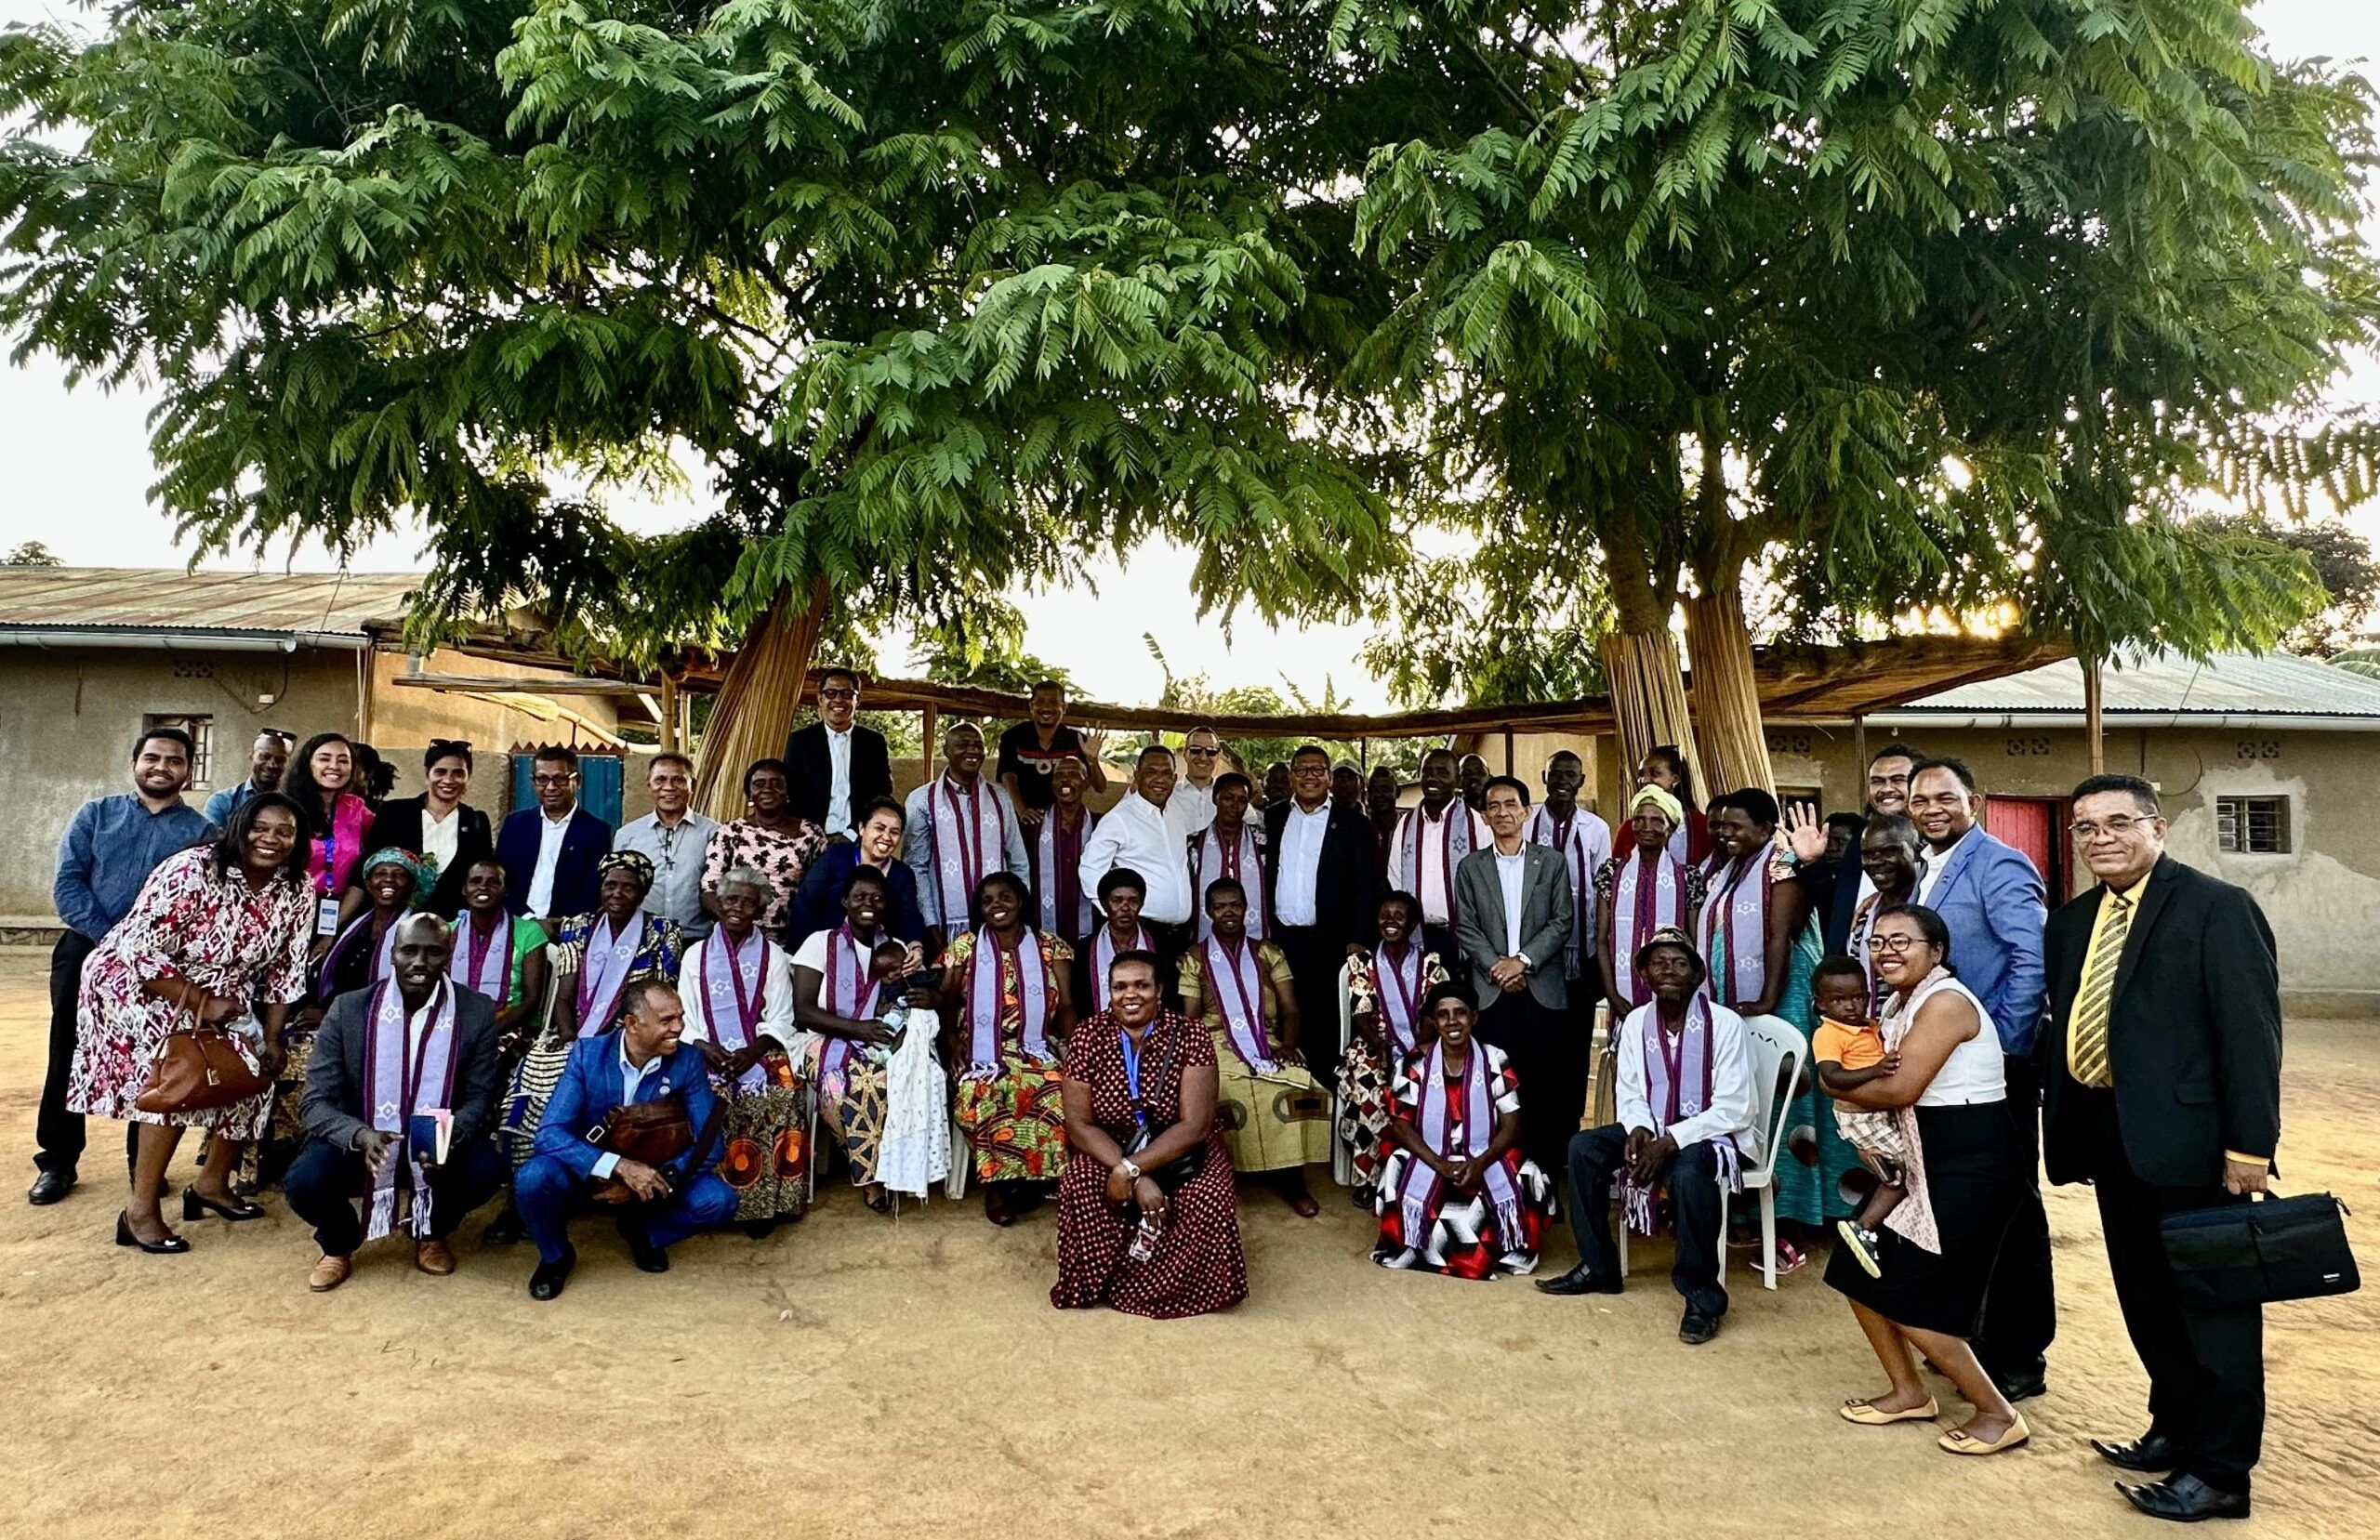 Large group photo at a Rwanda Reconciliation Village standing in front of trees outside.